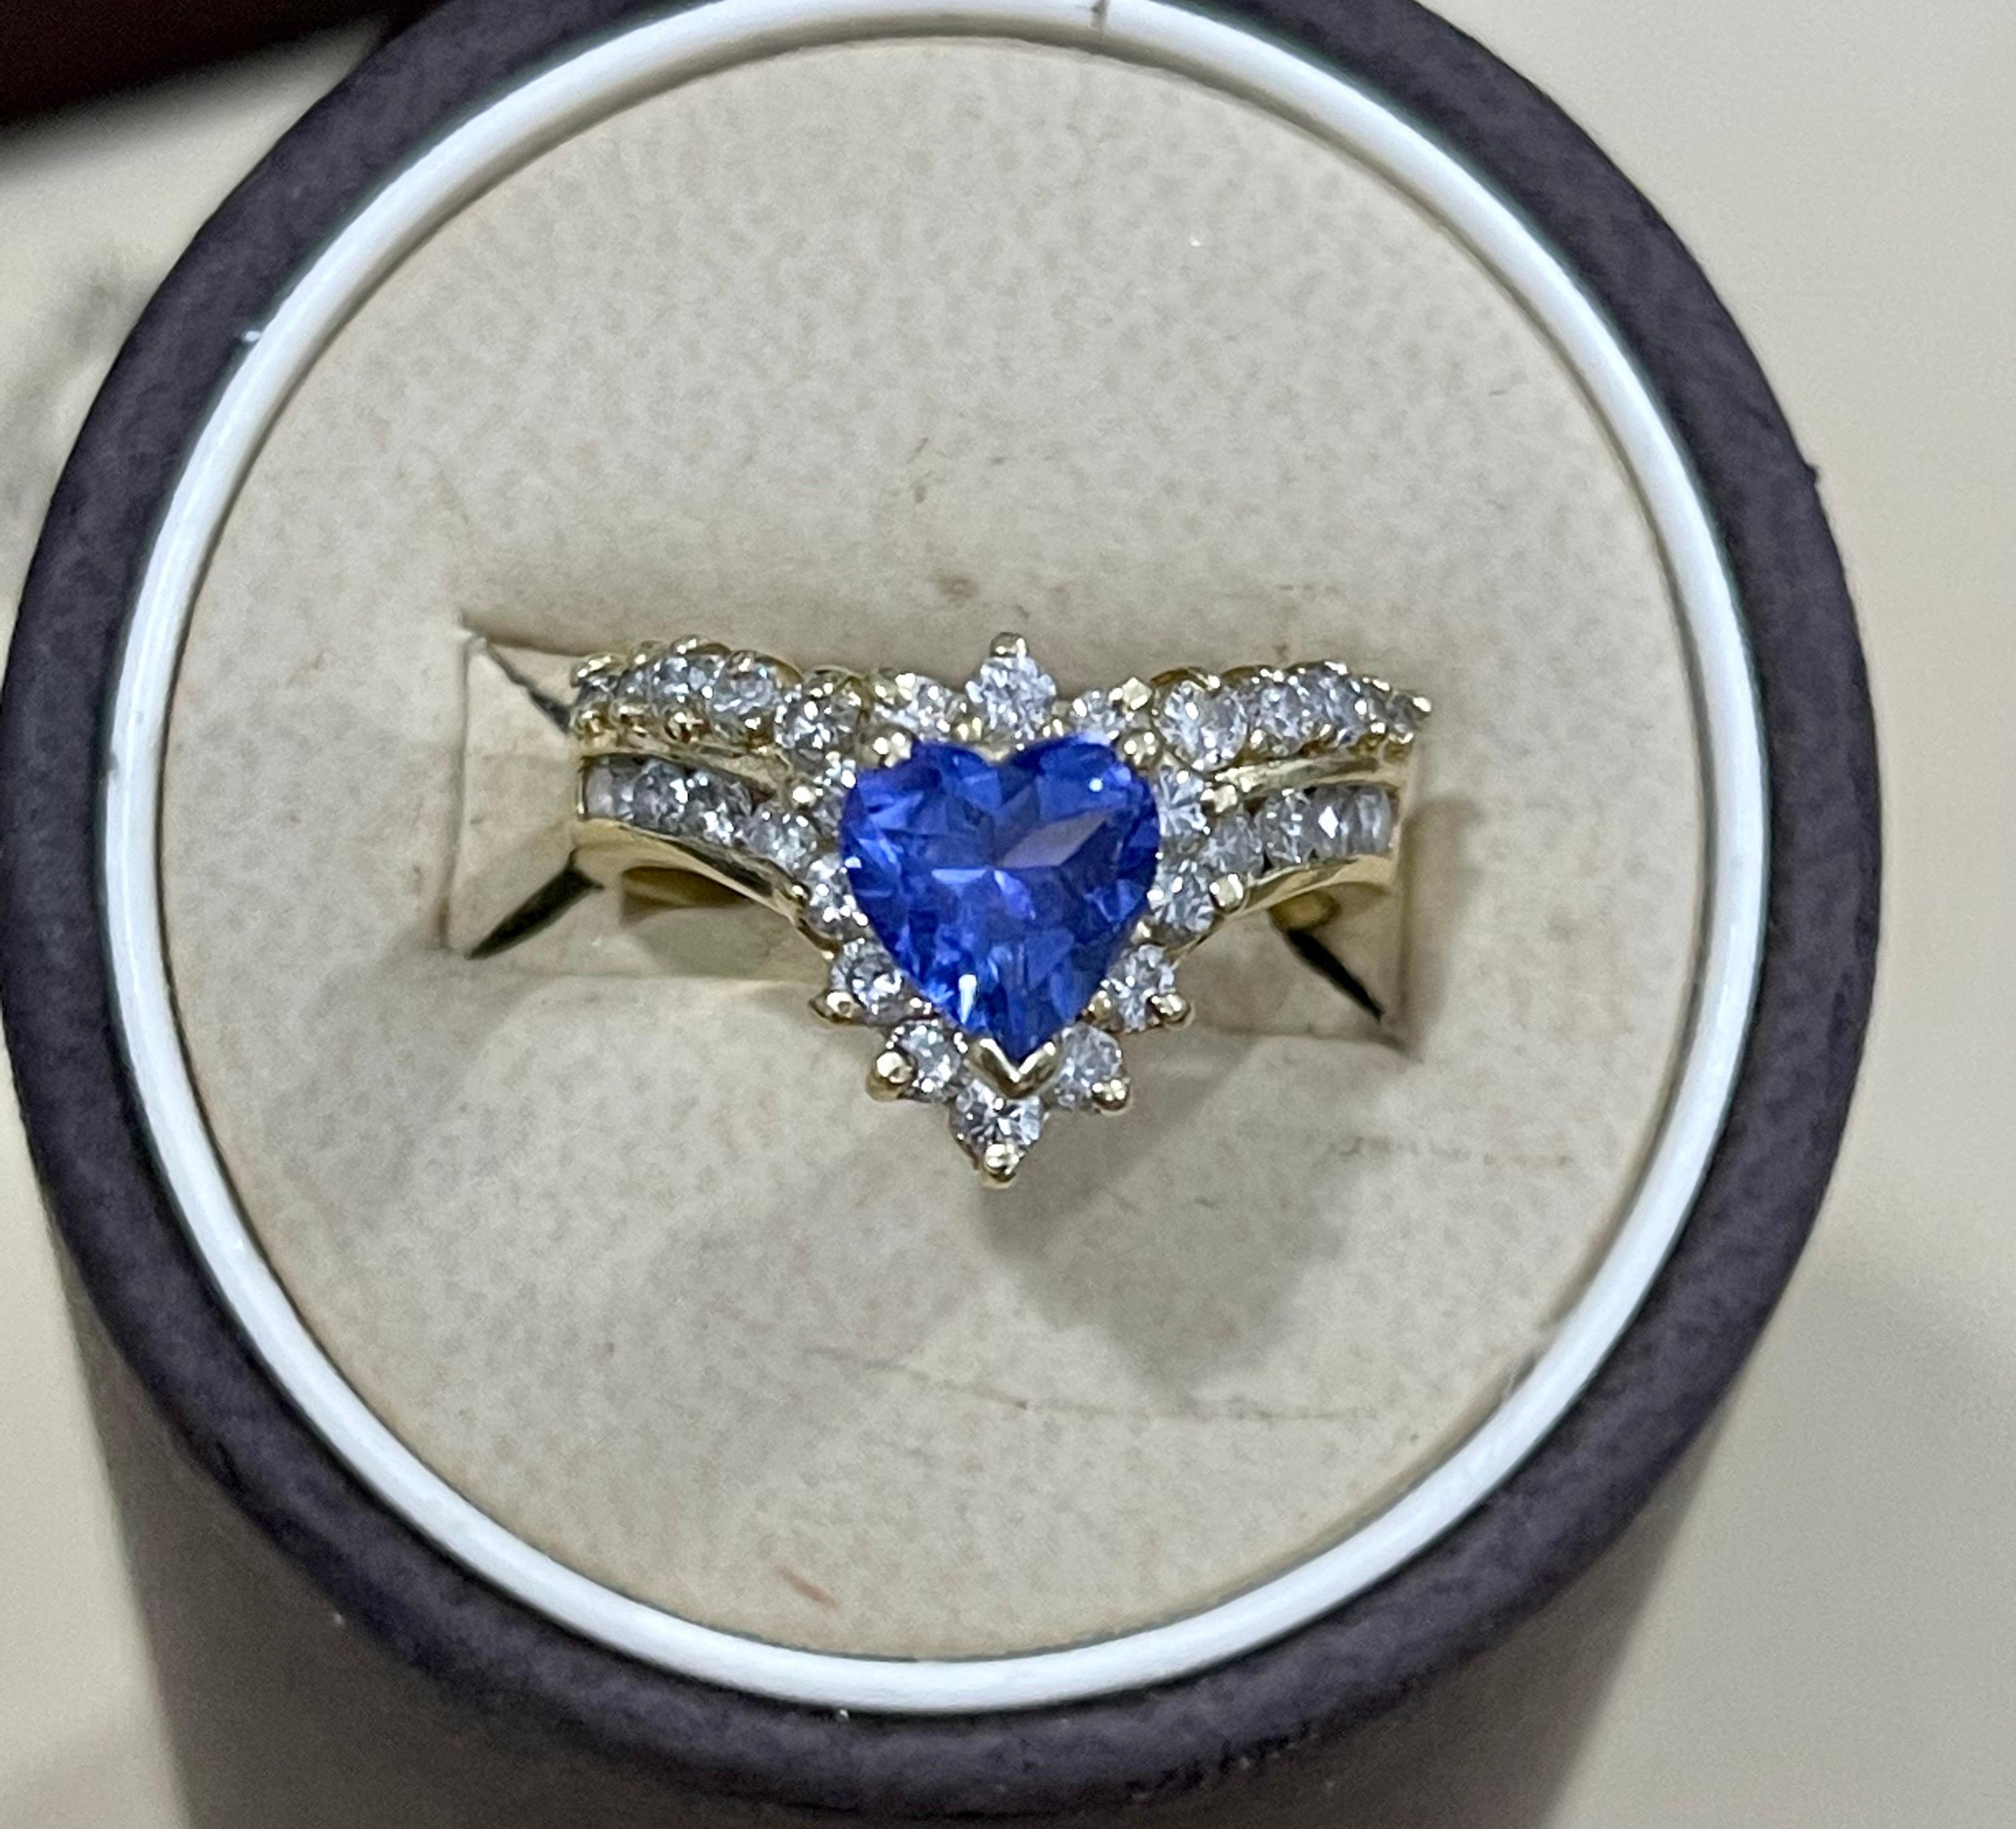 1.25 Carat Heart Shape Tanzanite and 1.5 Carat Diamond Ring 14 Karat Yellow Gold In Excellent Condition For Sale In New York, NY